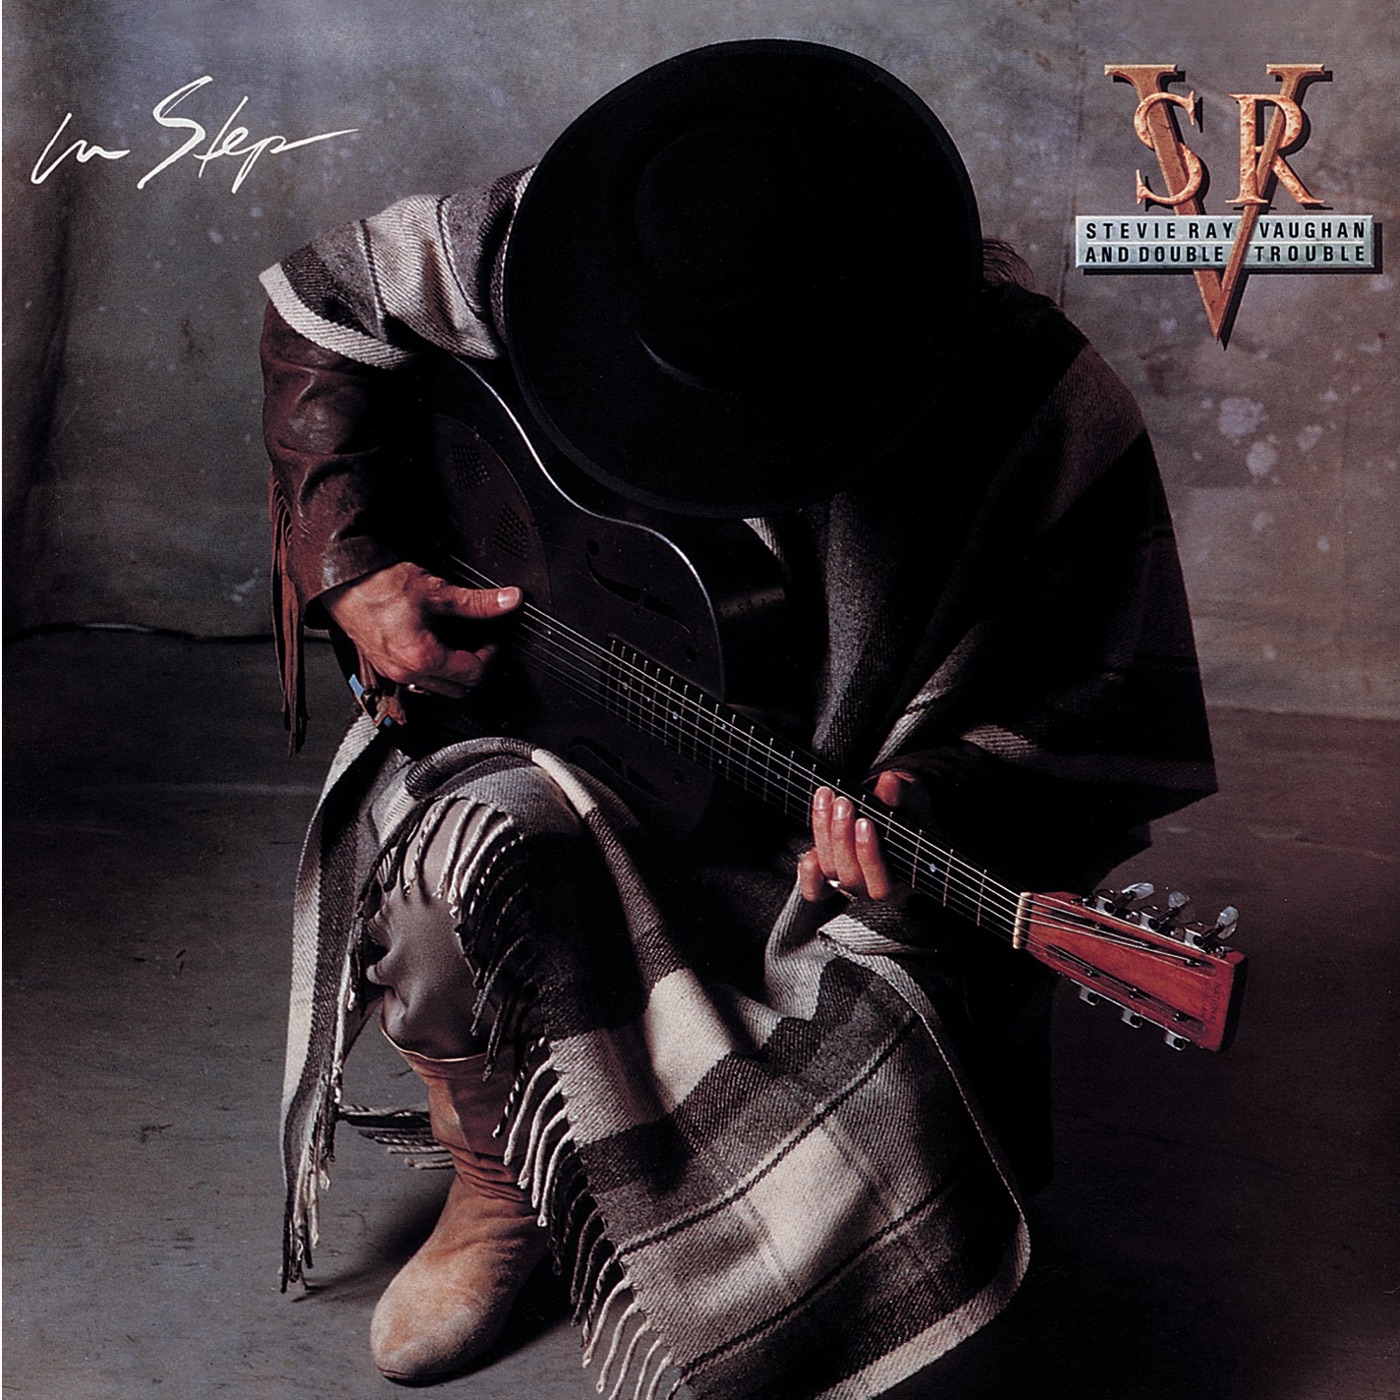 In Step by Stevie Ray Vaughan & Double Trouble, Stevie Ray Vaughan